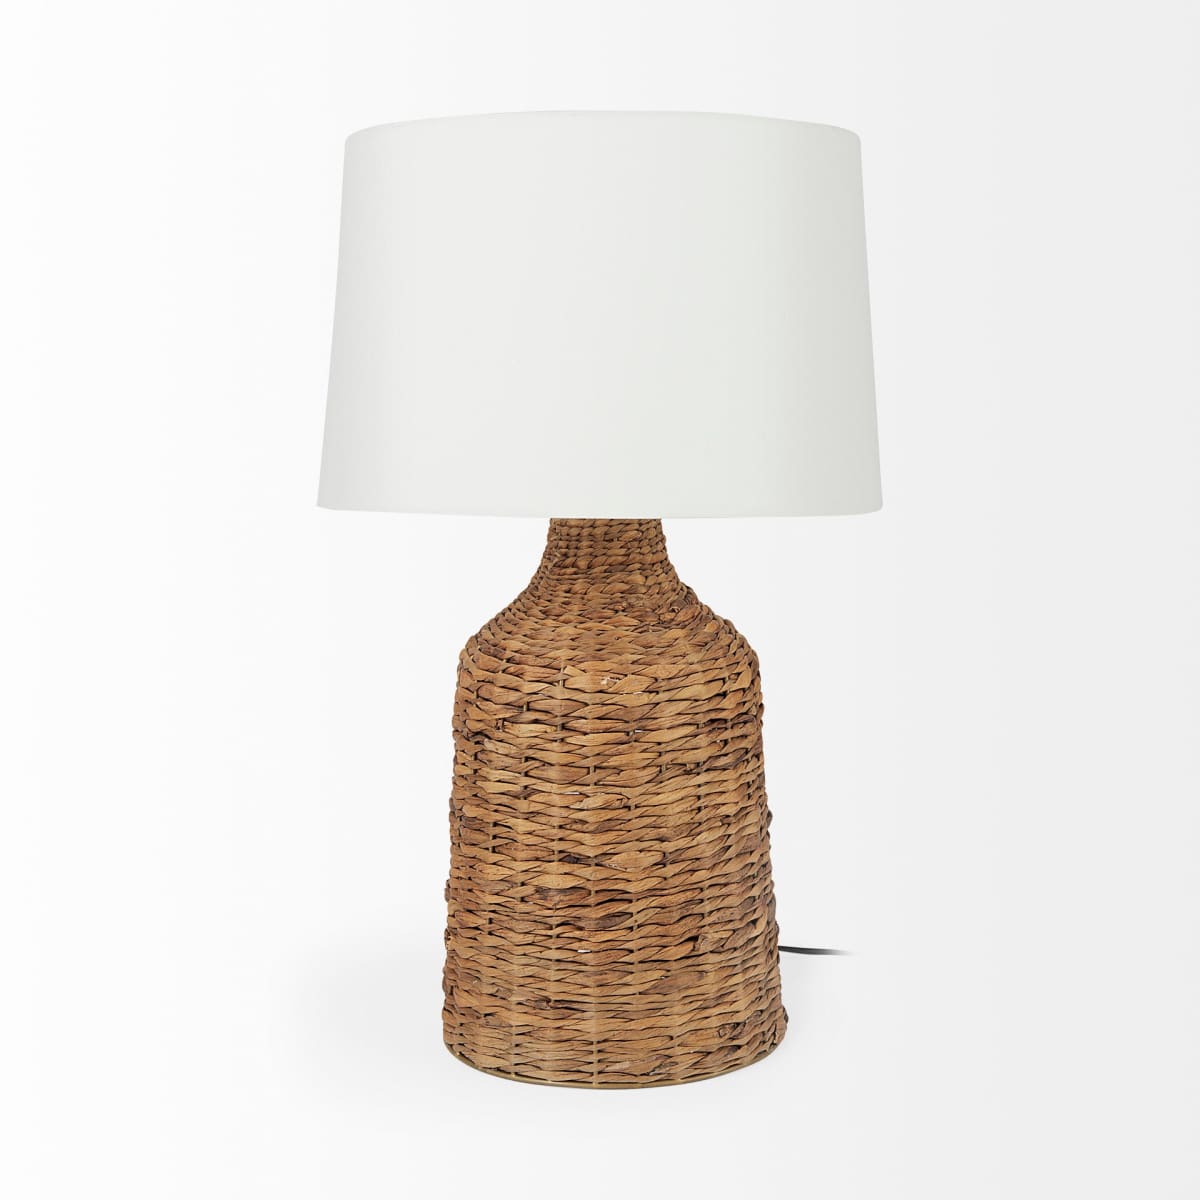 Campanile Table Lamp Brown Whicker - table-lamps